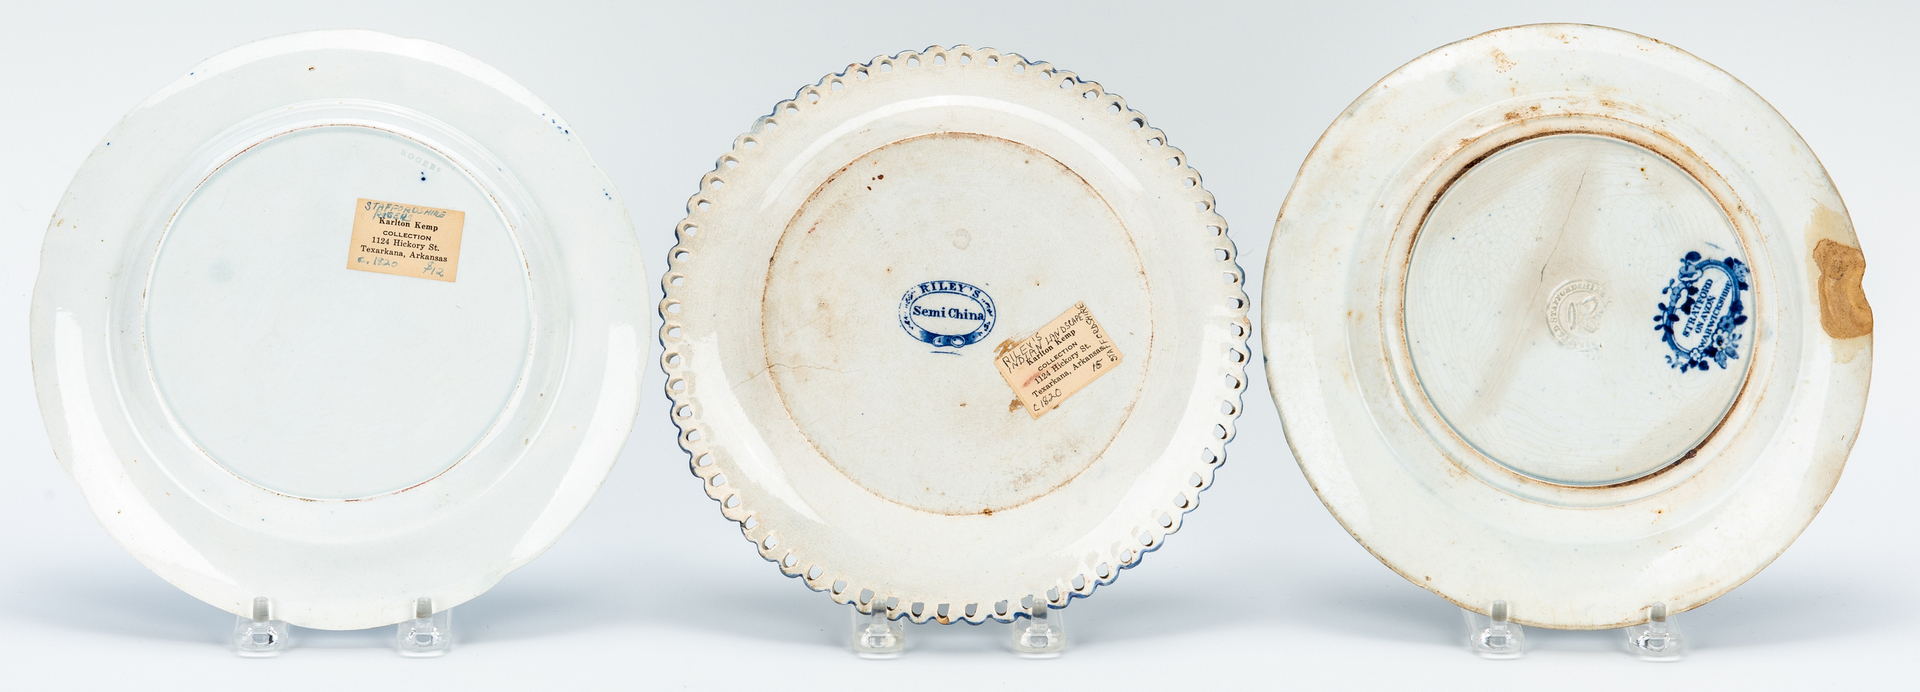 Lot 266: 17 Historical Staffordshire & Spode Items